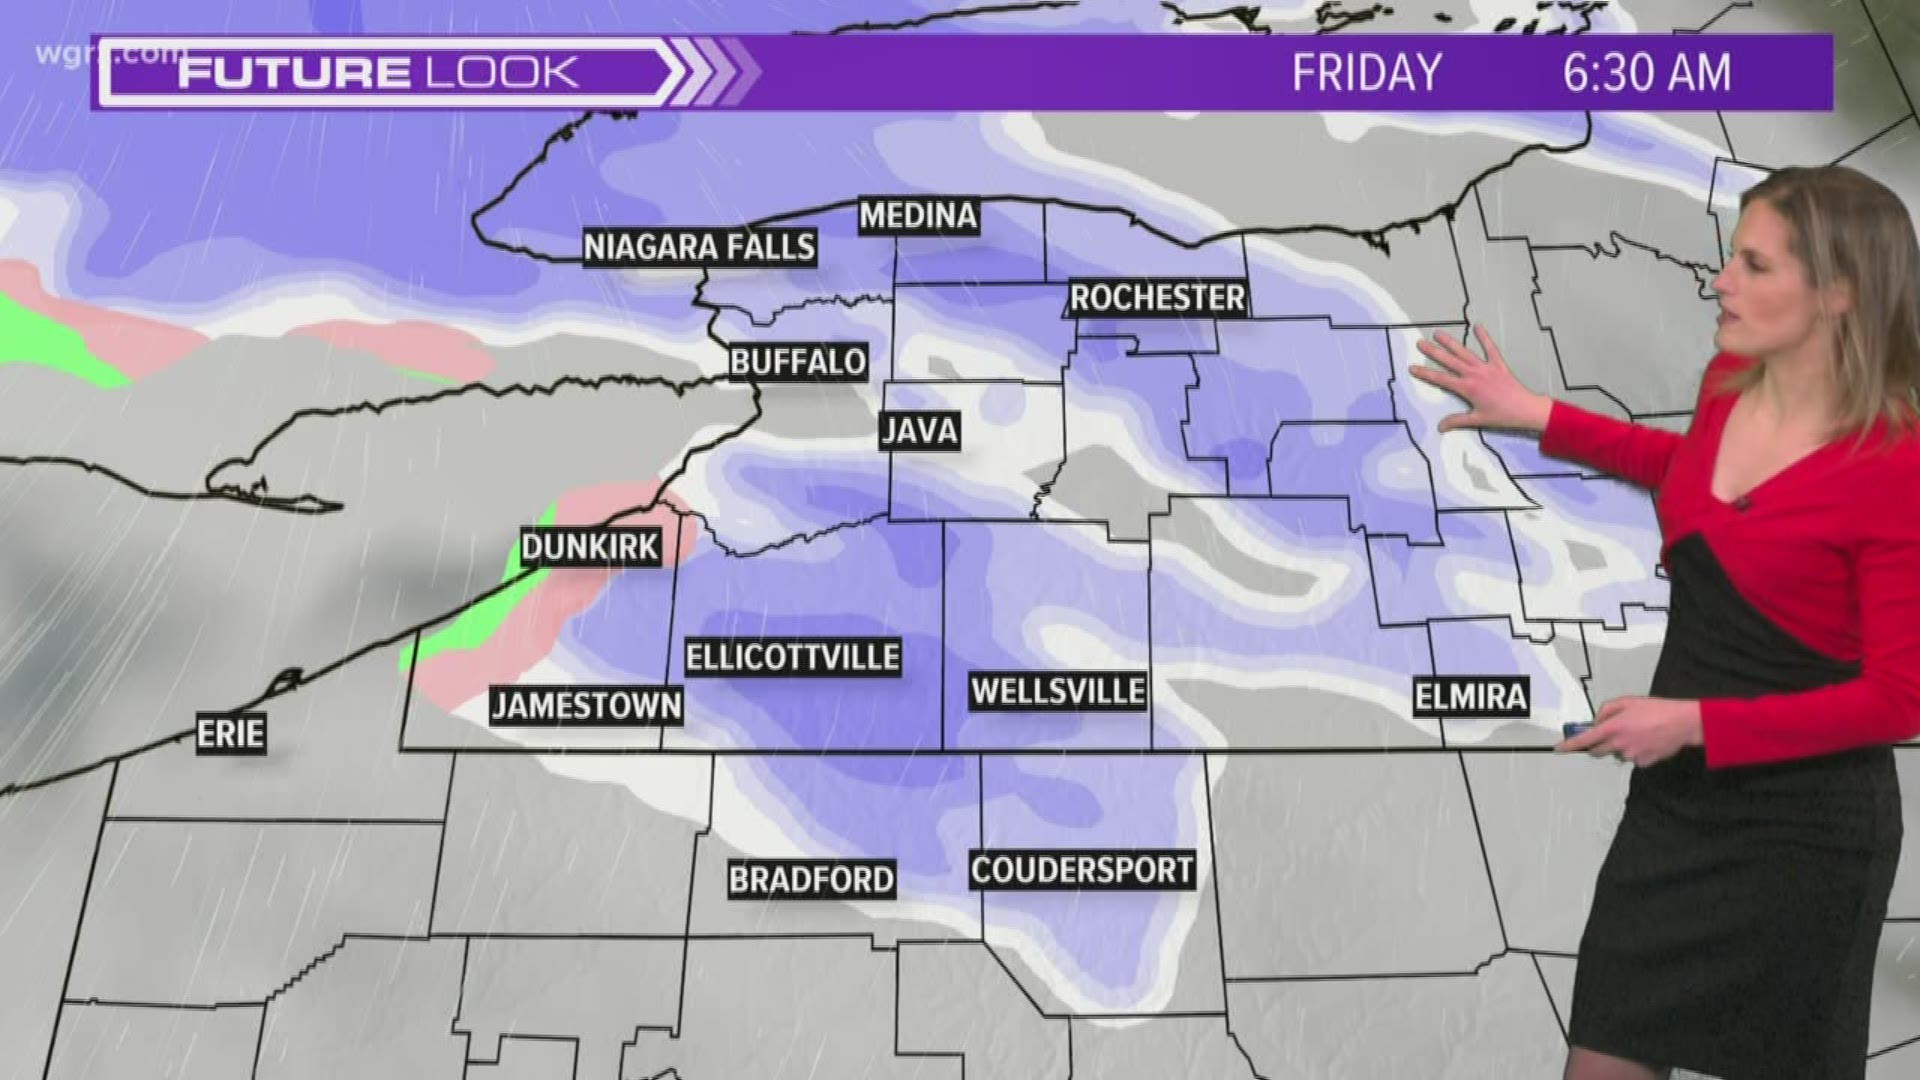 It won't be a lot of snow, but the timing will not be great for Friday morning rush hour traffic. Storm Team 2's Heather Waldman is tracking the snow.